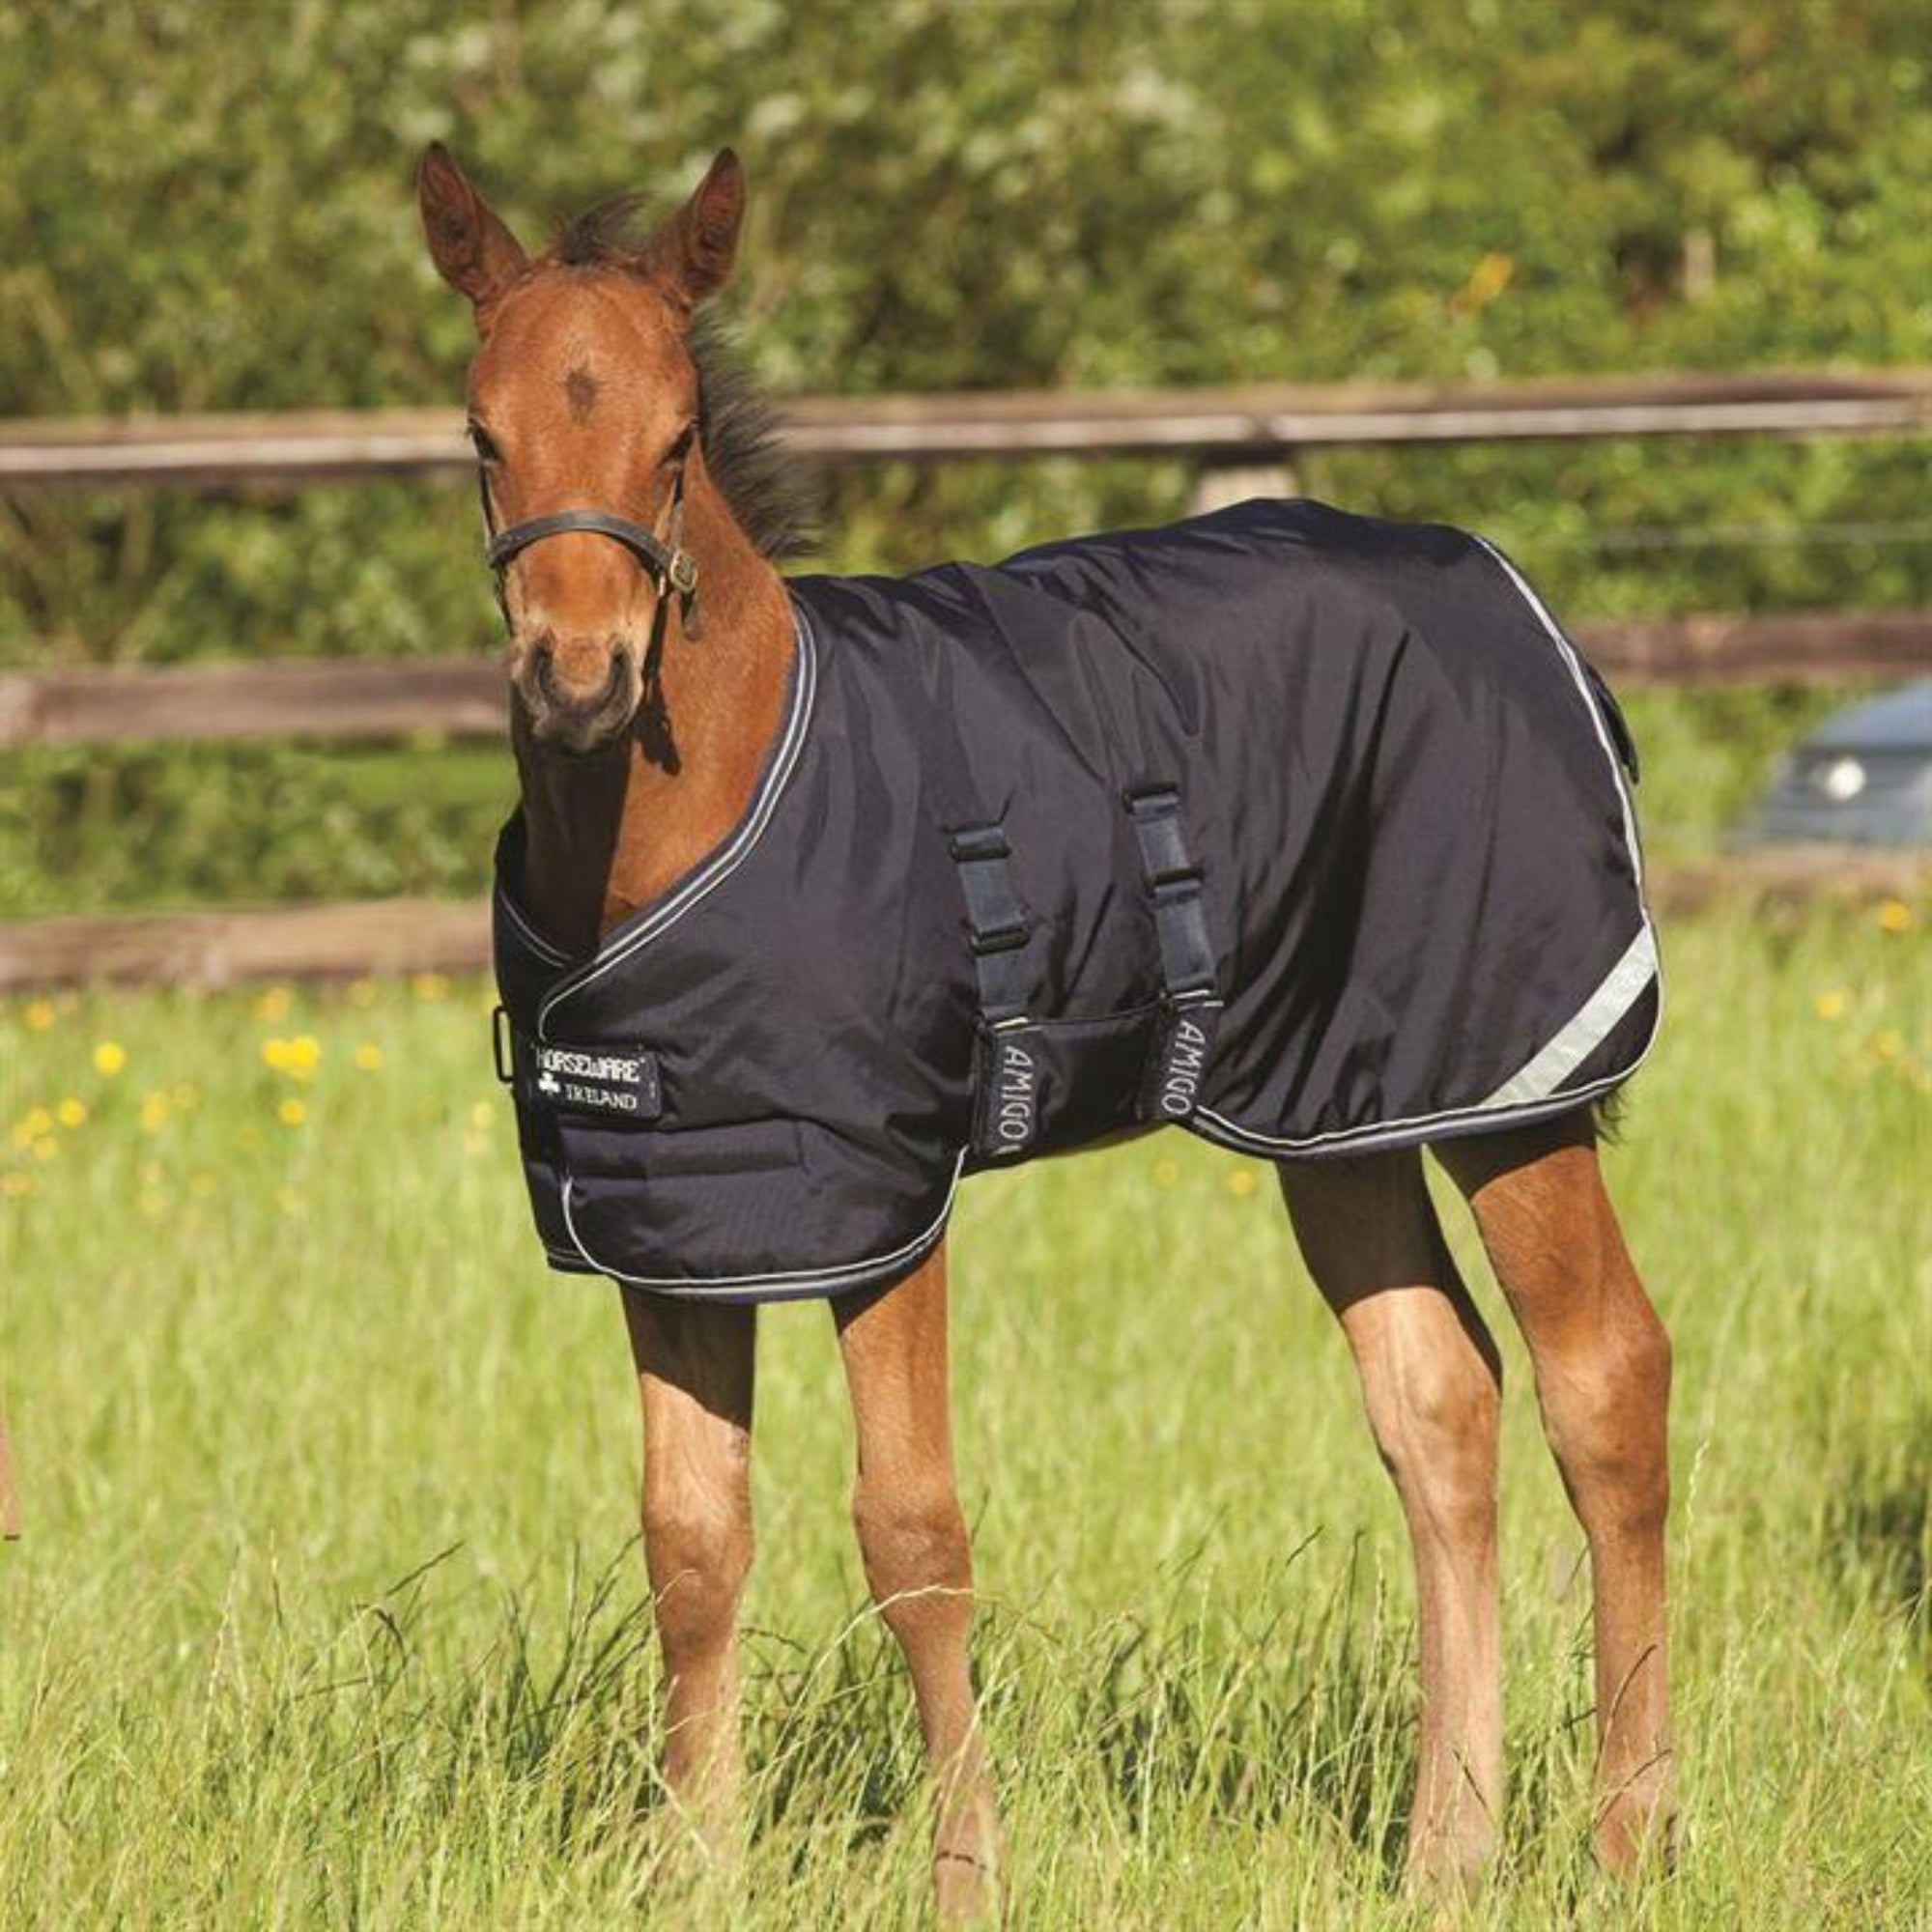 Little bay foal with a black foal rug on